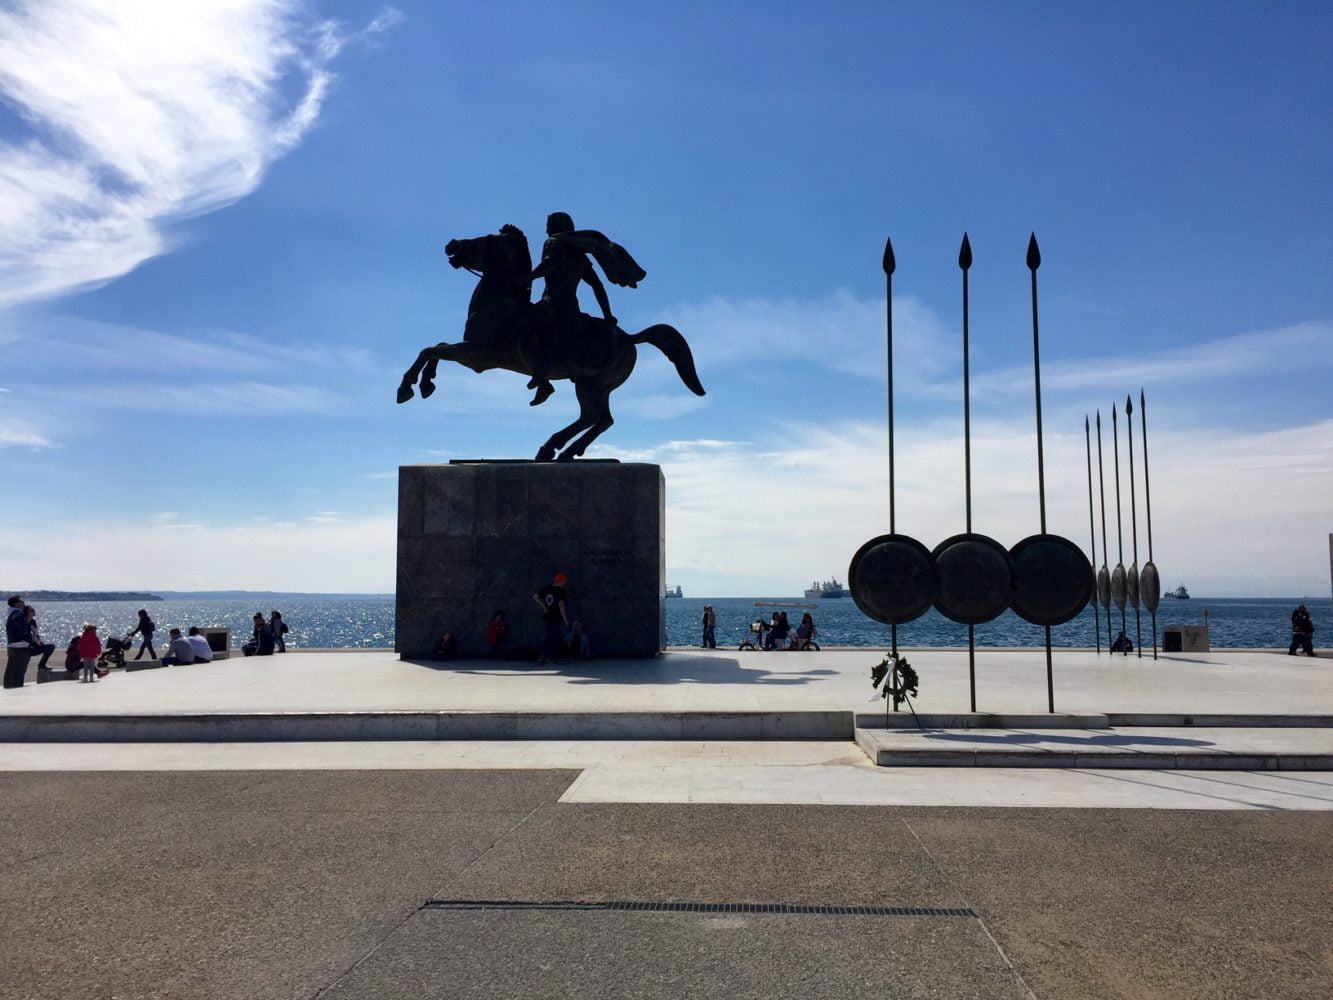 The statue of Alexander the Great in Thessaloniki